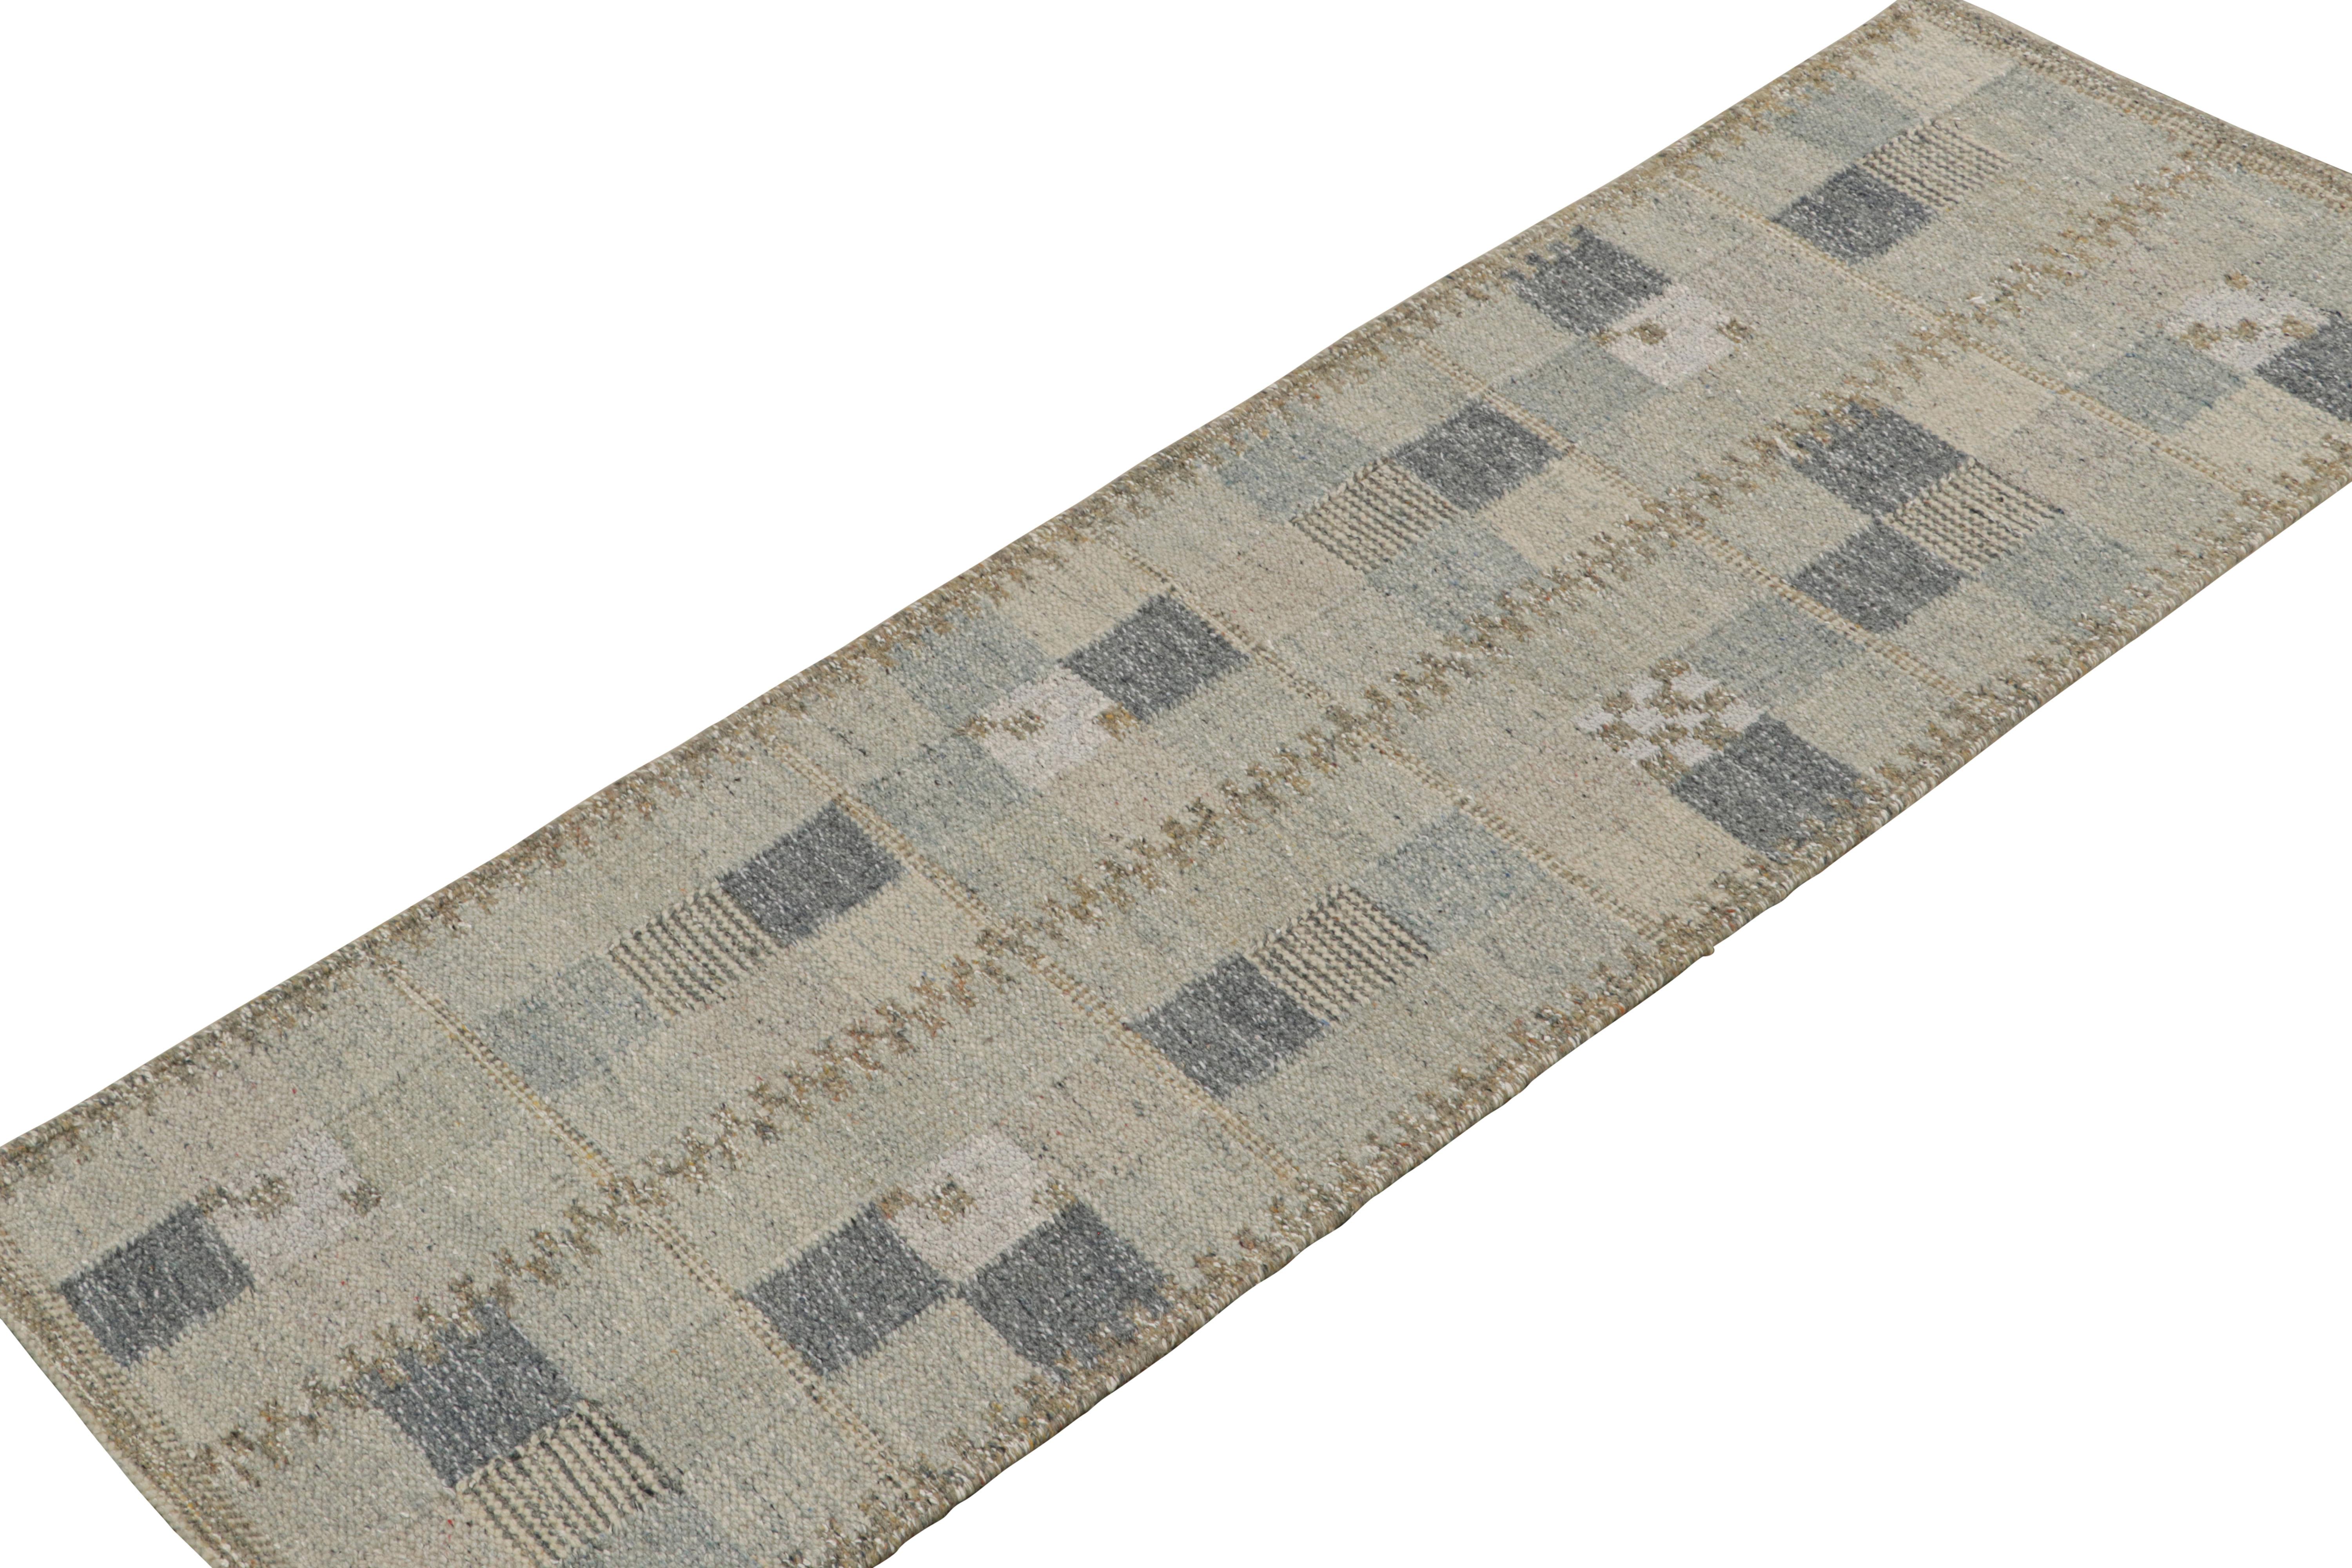 This 3x8 Swedish style kilim runner rug is from the award-winning Scandinavian rug collection by Rug & Kilim. Handwoven in wool, cotton and natural yarns, this flatweave is inspired by Swedish Deco Rollakan and Rya rugs.

On the Design: 

This